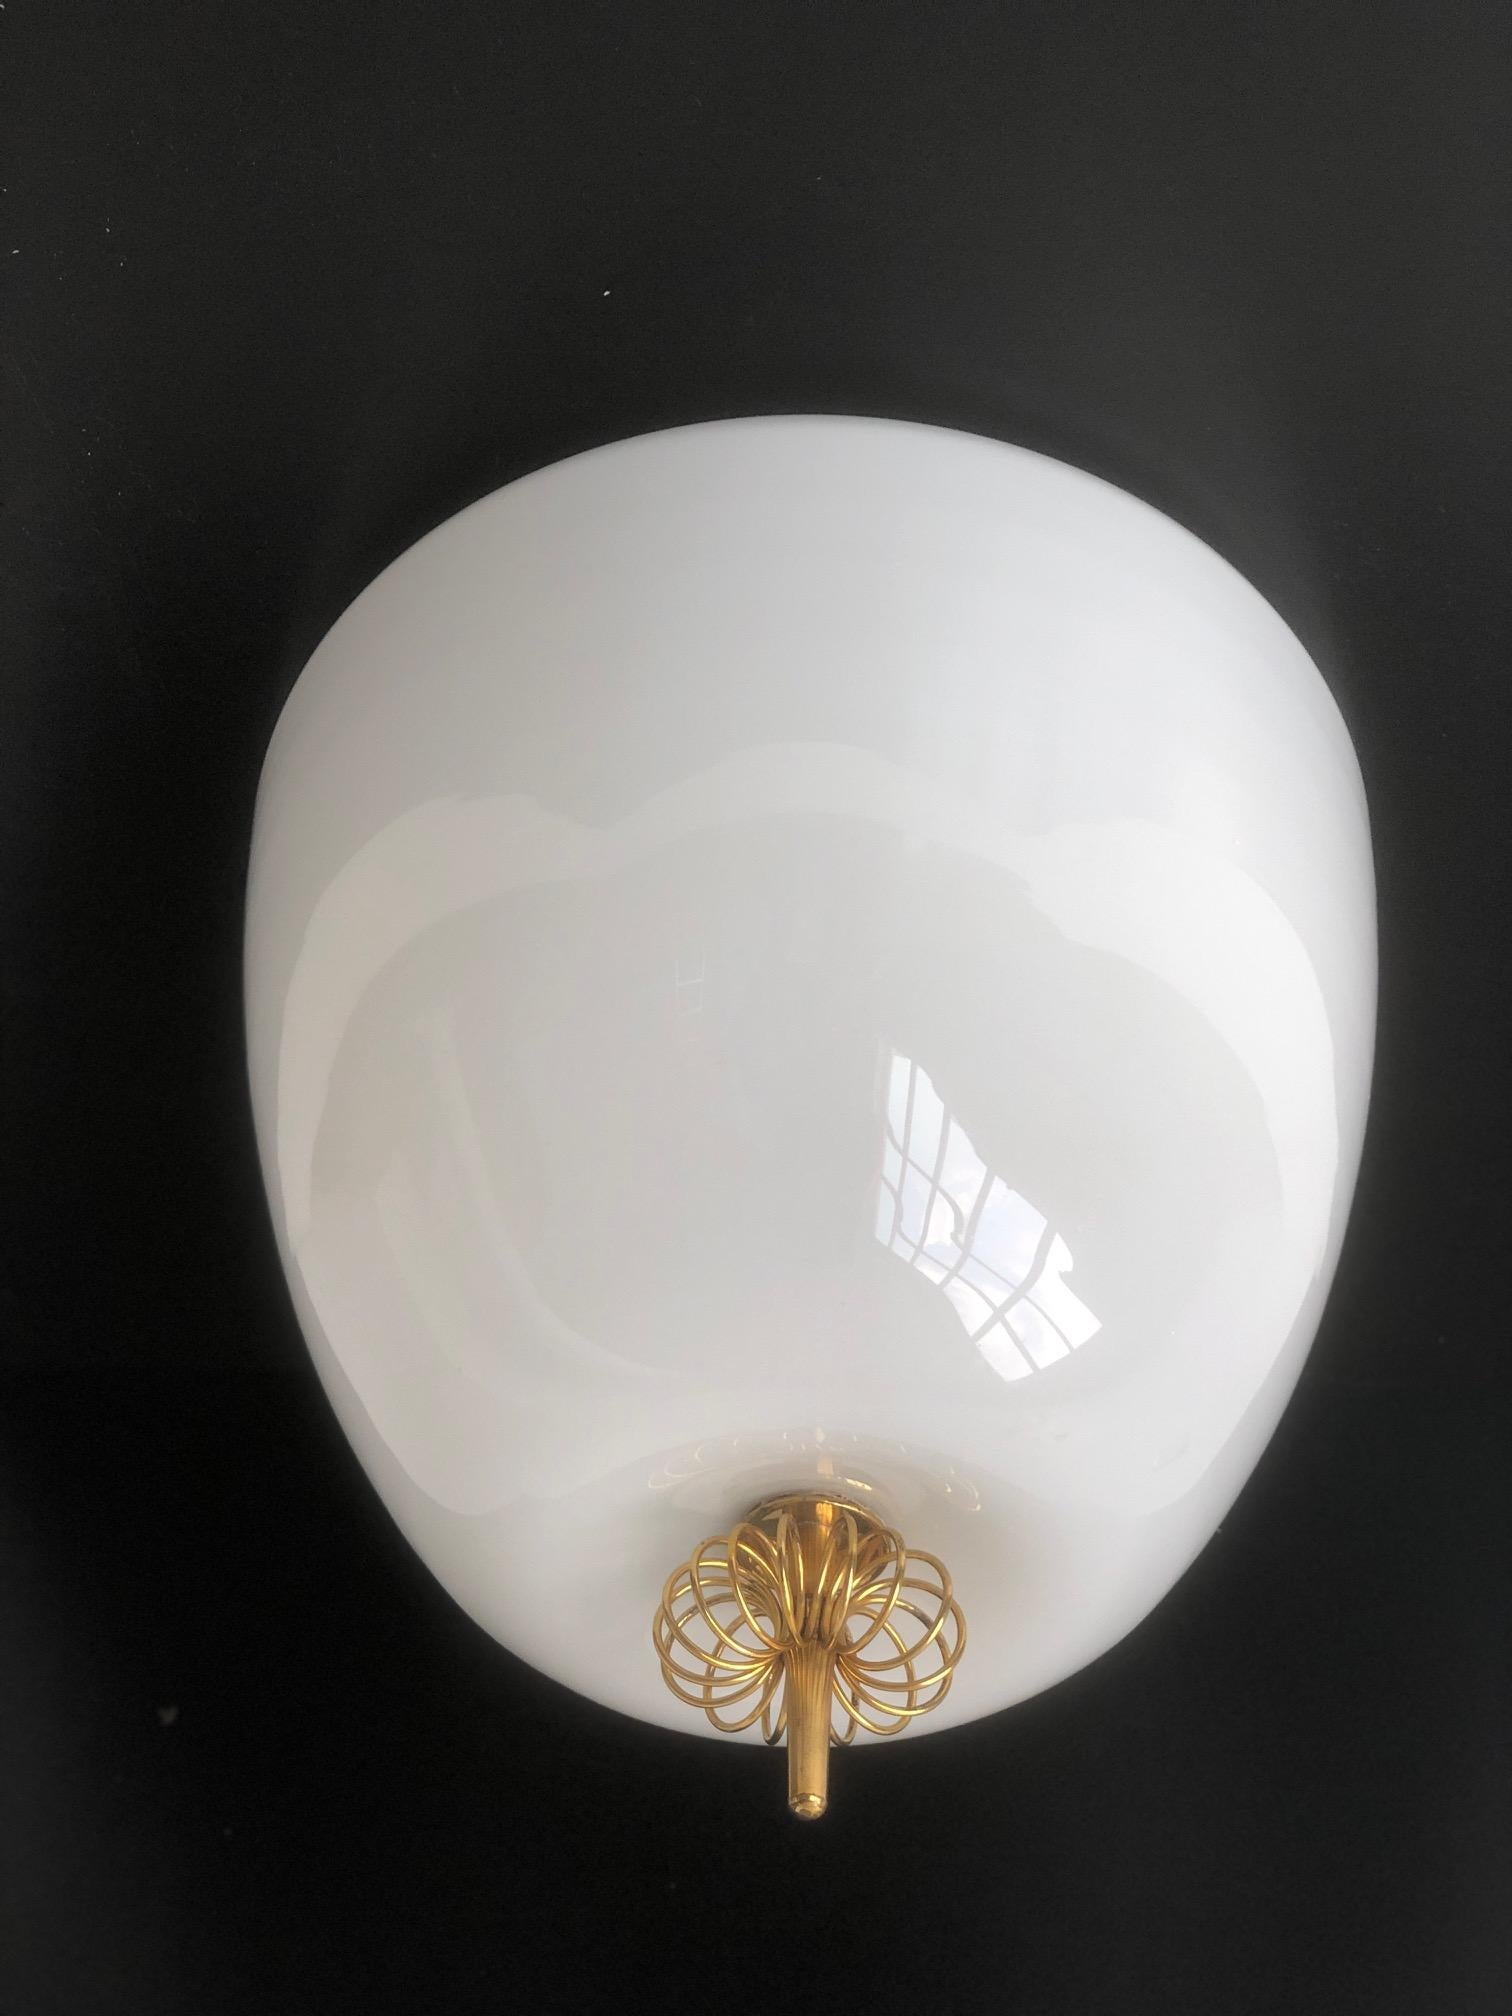 Flush mount  lamp designed by Gunnel Nyman for Idman, Finland. Circa 1950th. Opaline glass with brass decor. Stamped 